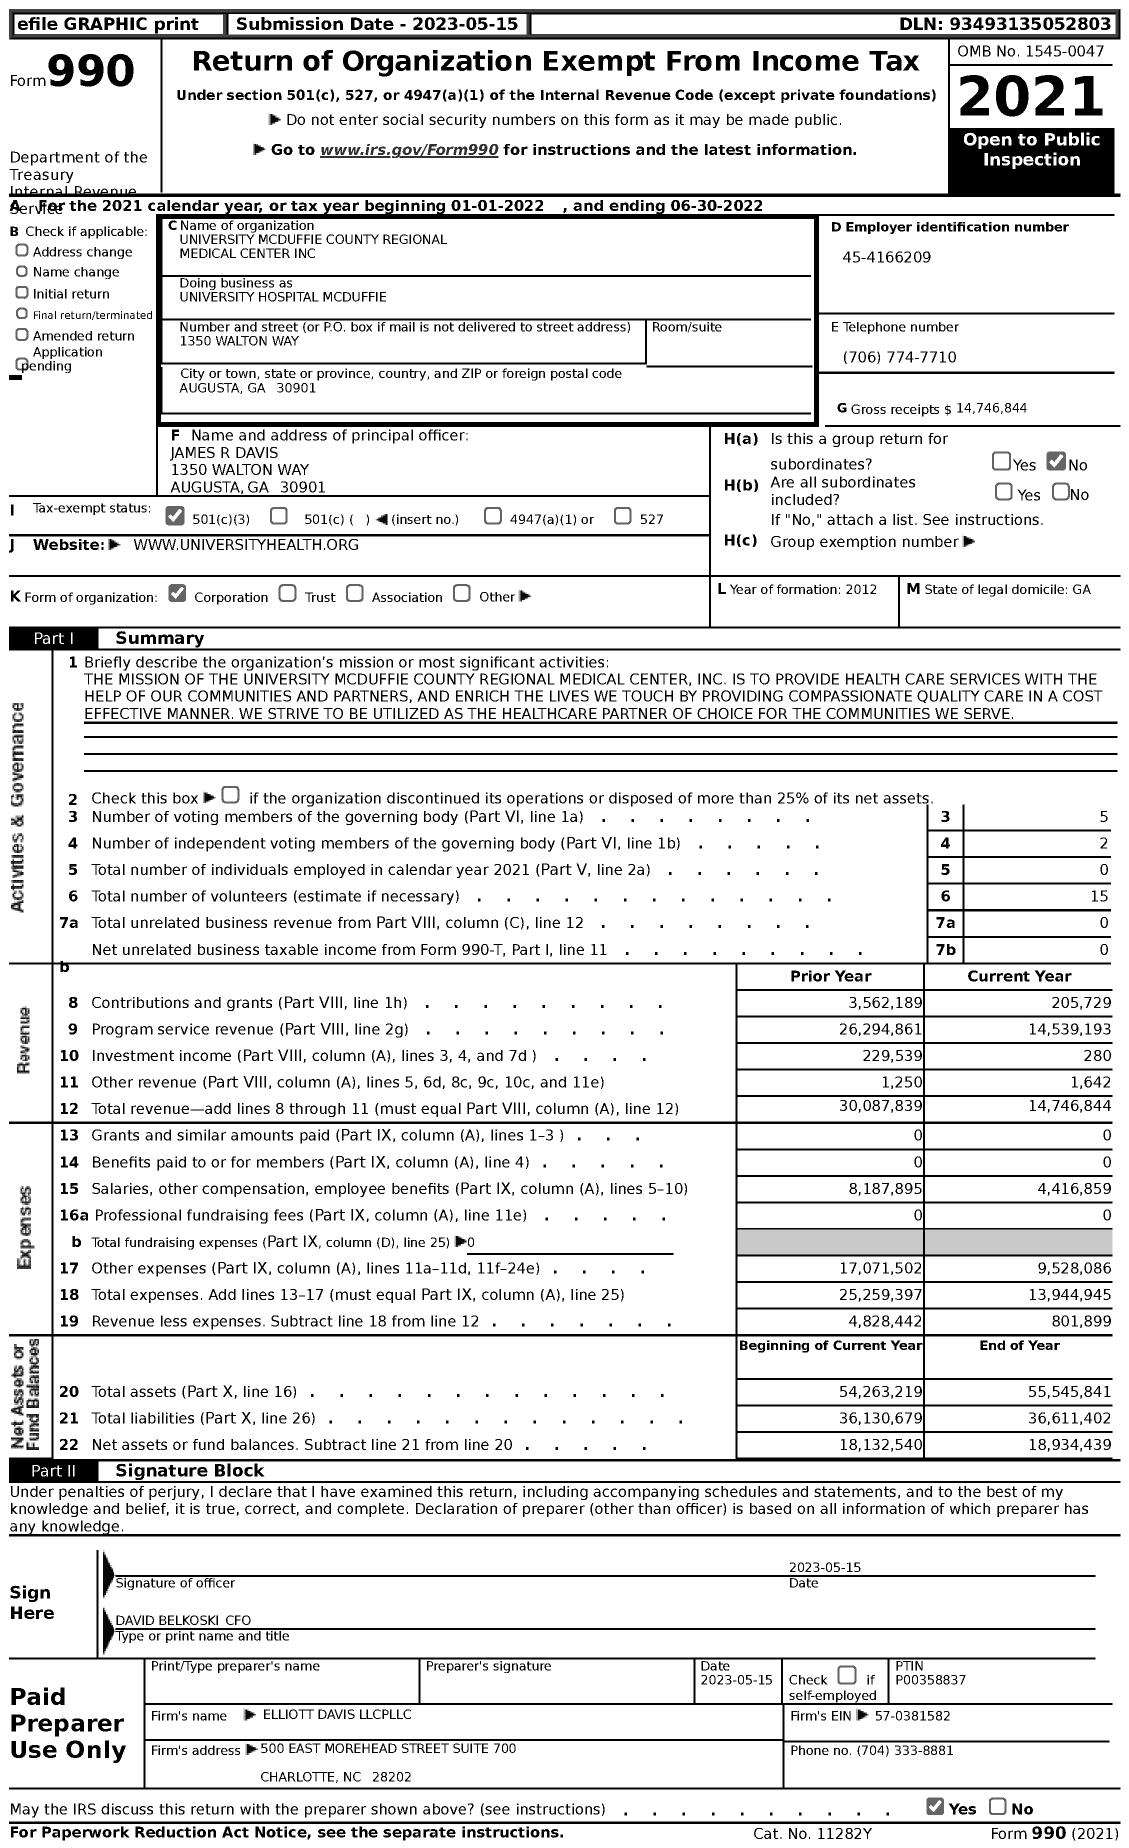 Image of first page of 2021 Form 990 for University Hospital McDuffie (UHM)